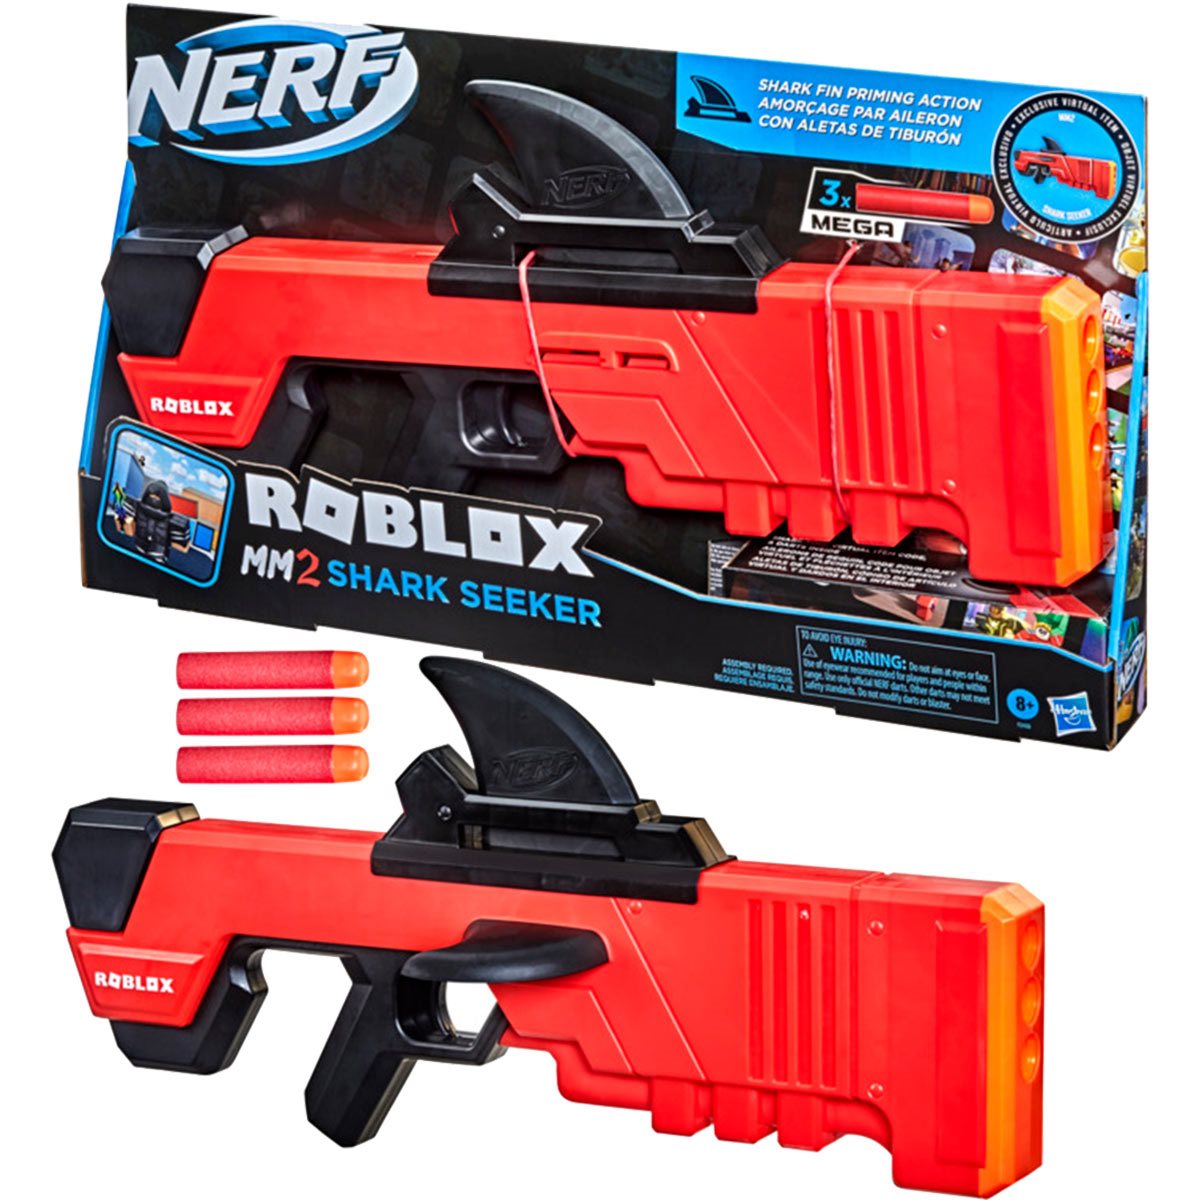 Roblox Nerf Blasters Wave 1 Set of 3 - Entertainment Earth